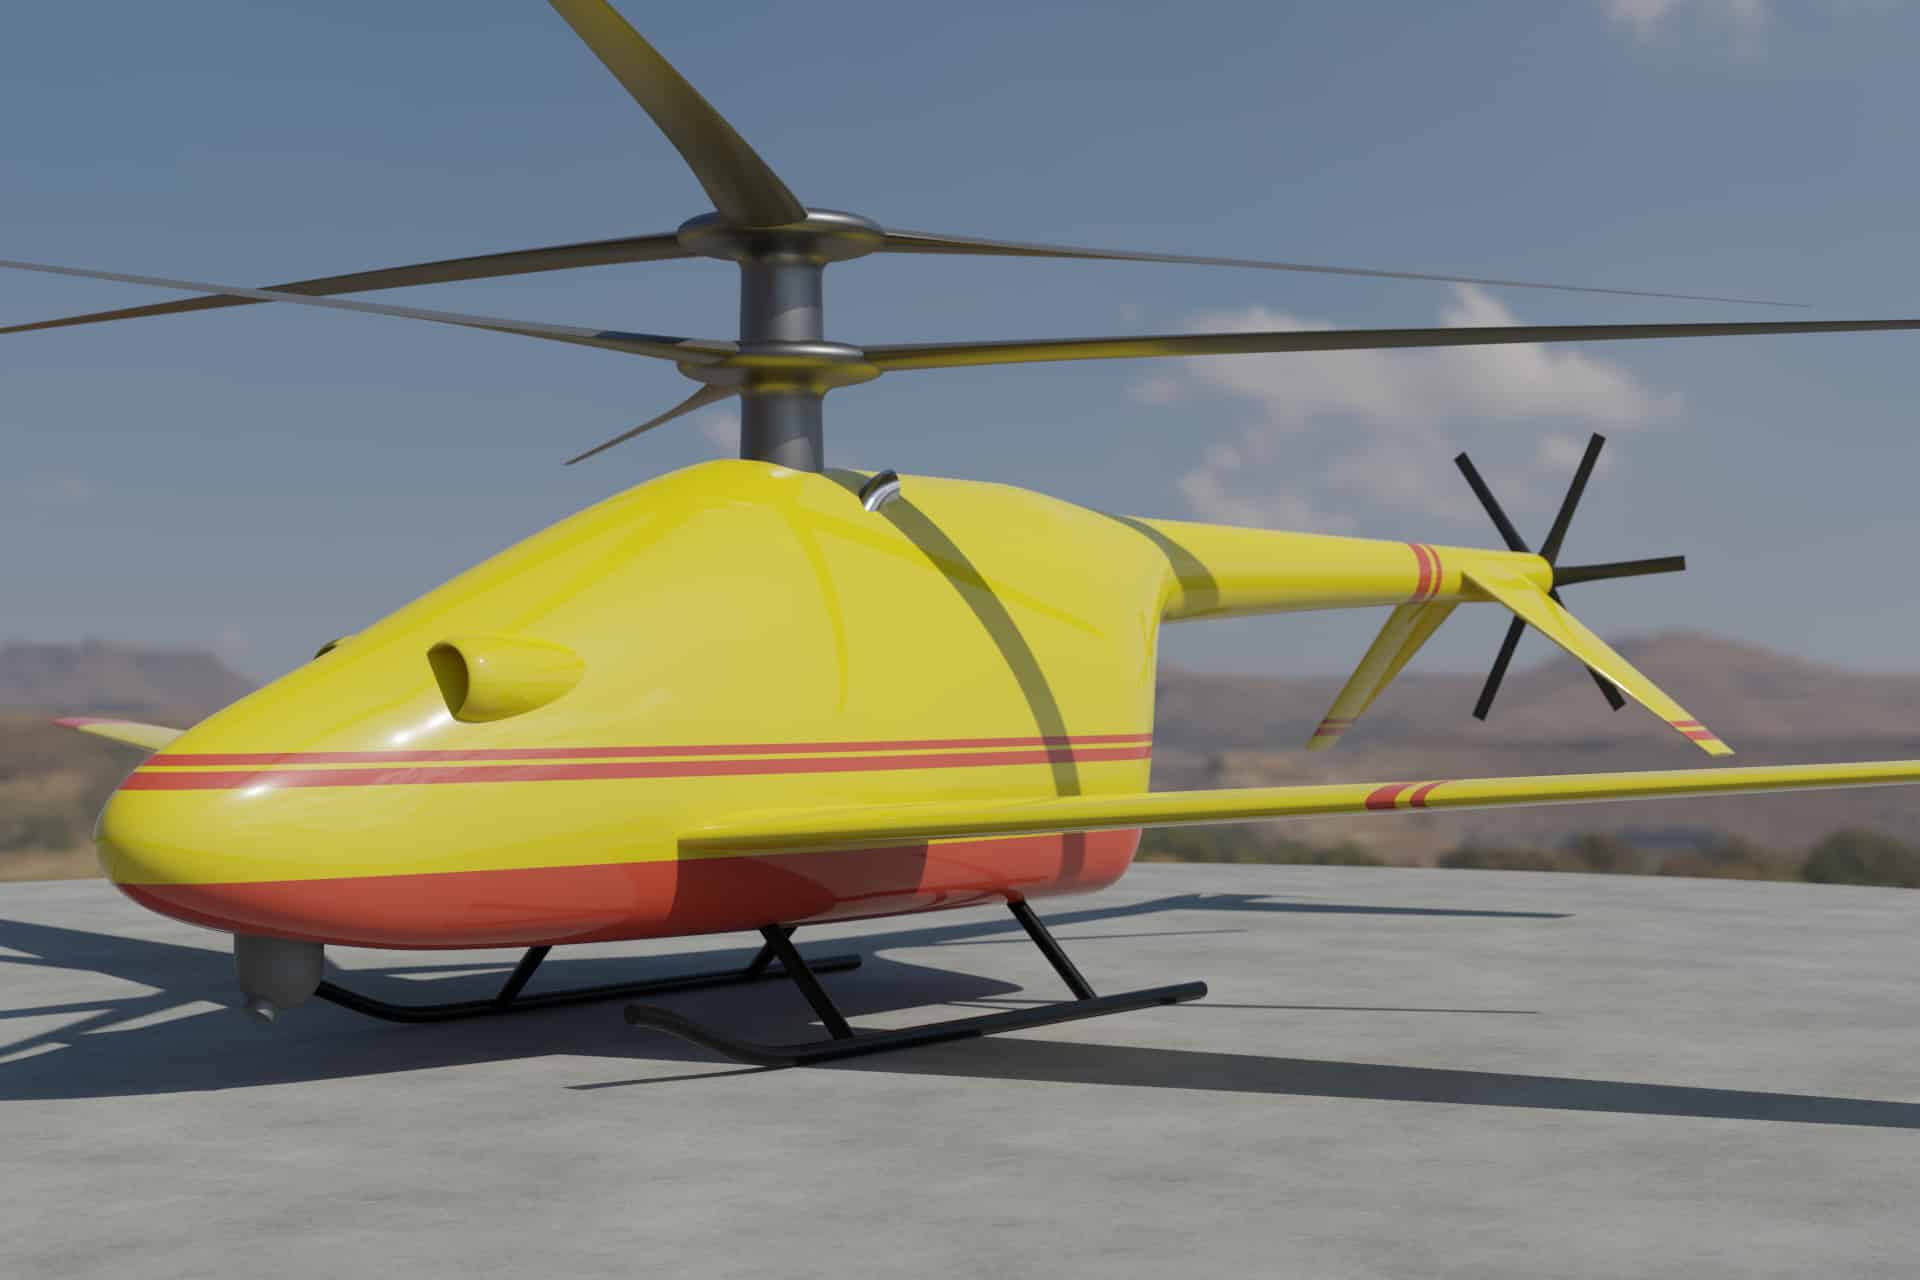 Firefighting aircraft of the future are flexible, autonomous and can land vertically